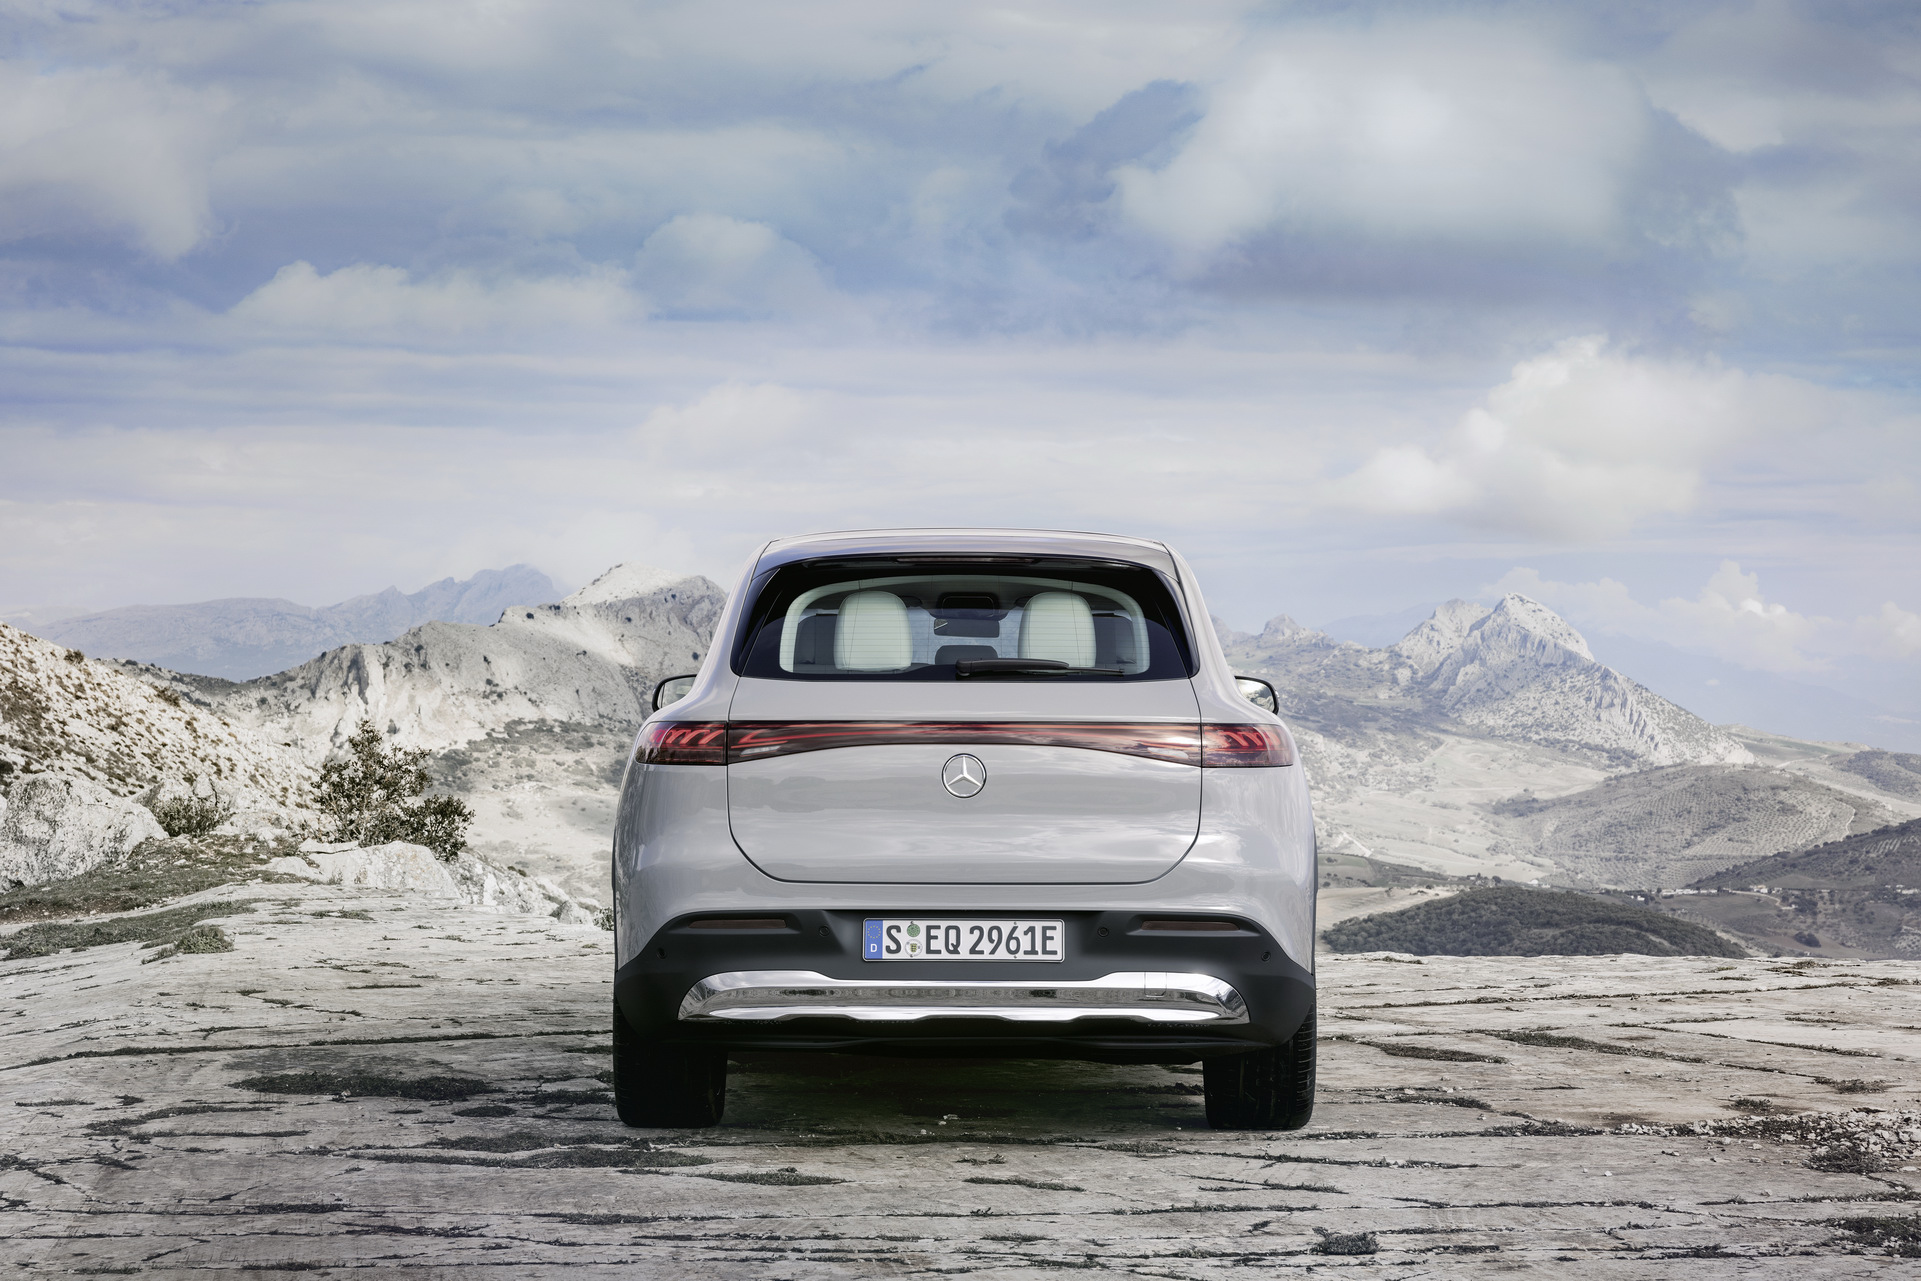 The Mercedes-Benz EQS super product officially has an SUV version - the 